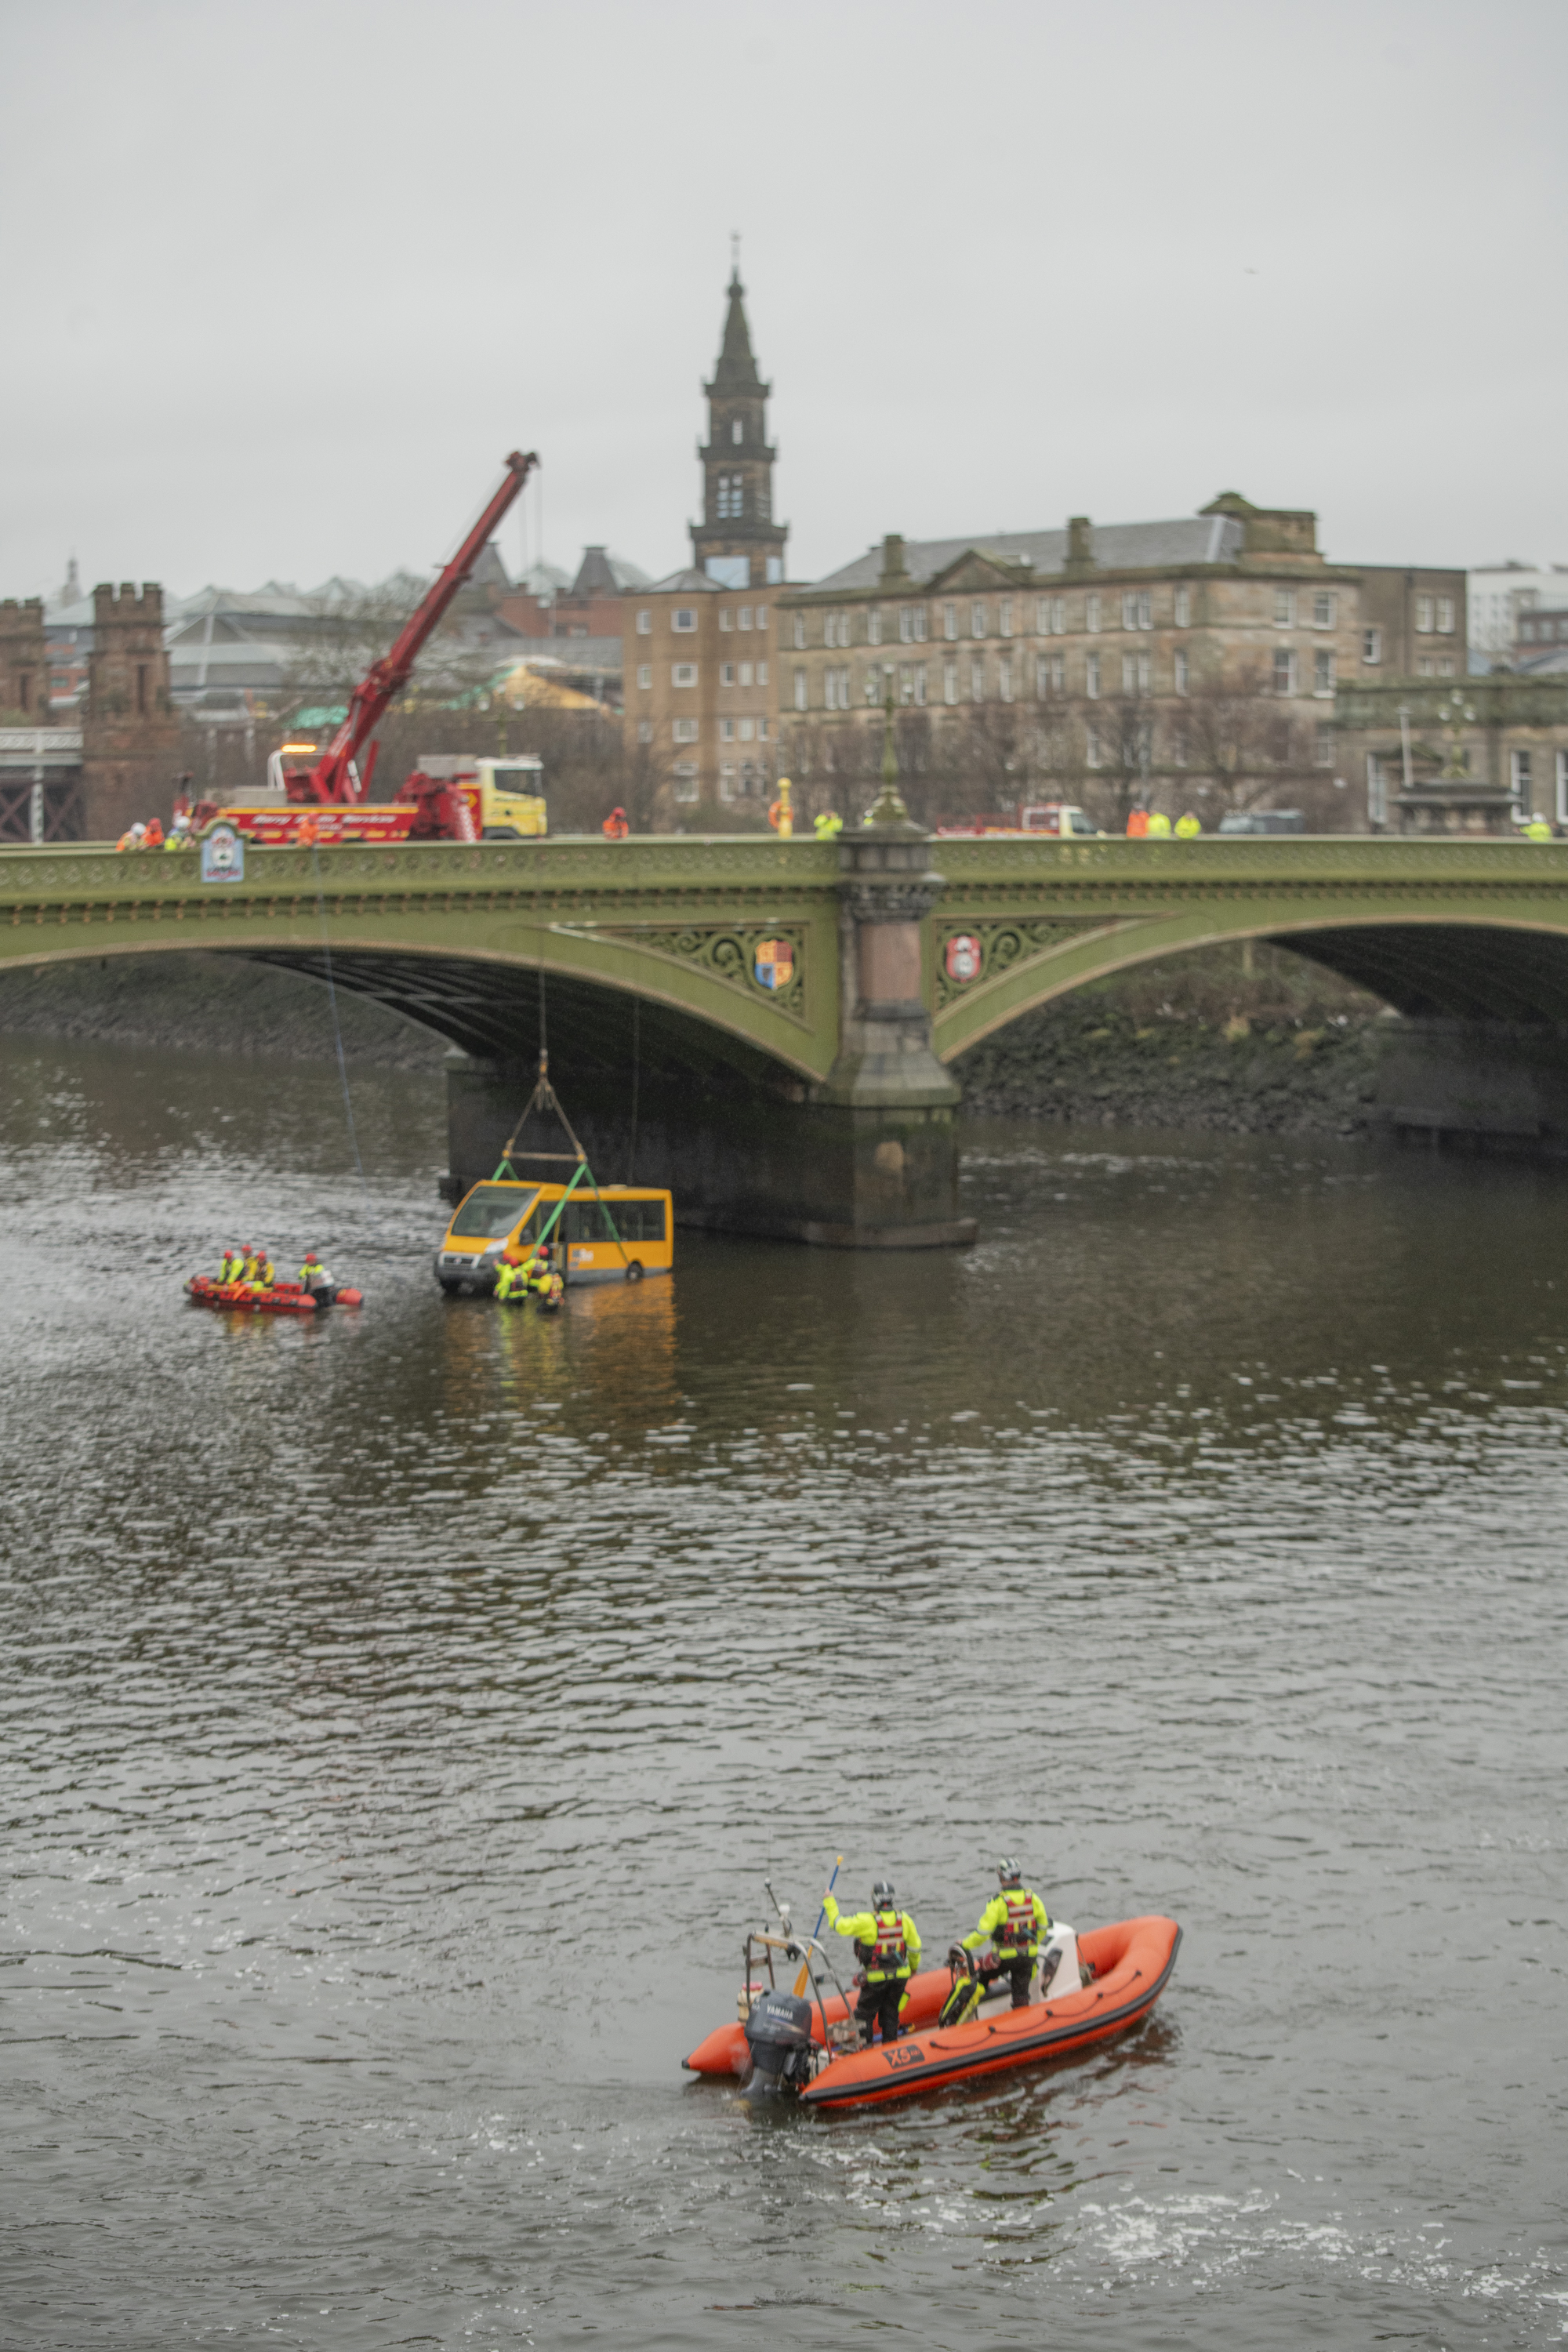 Minibus in the River Clyde as part of a major emergency services training exercise